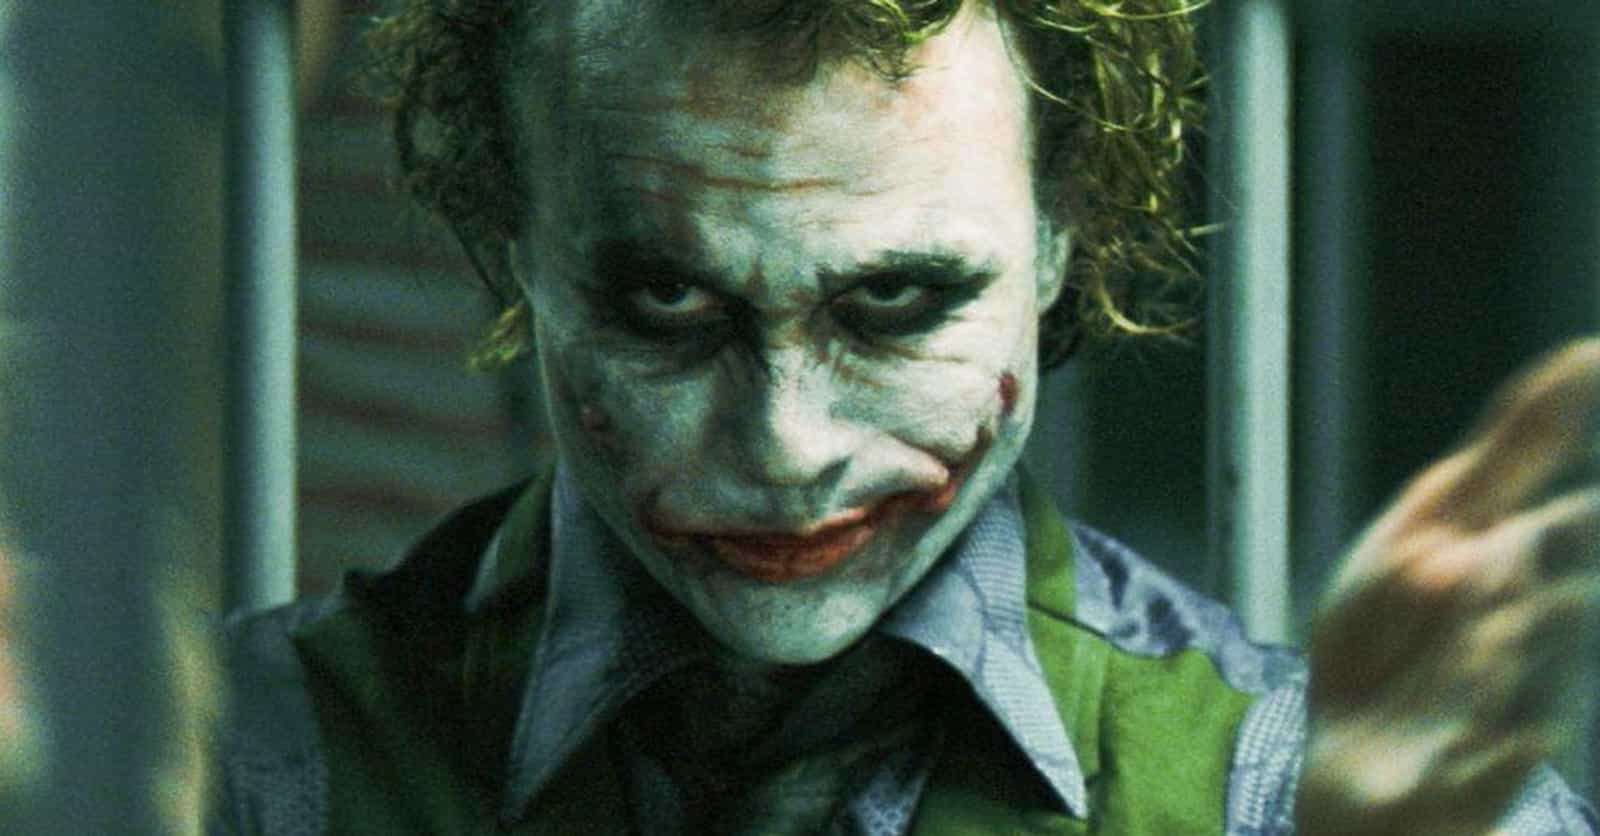 All 20+ Actors Who Played Joker, Ranked Best To Worst By Fans